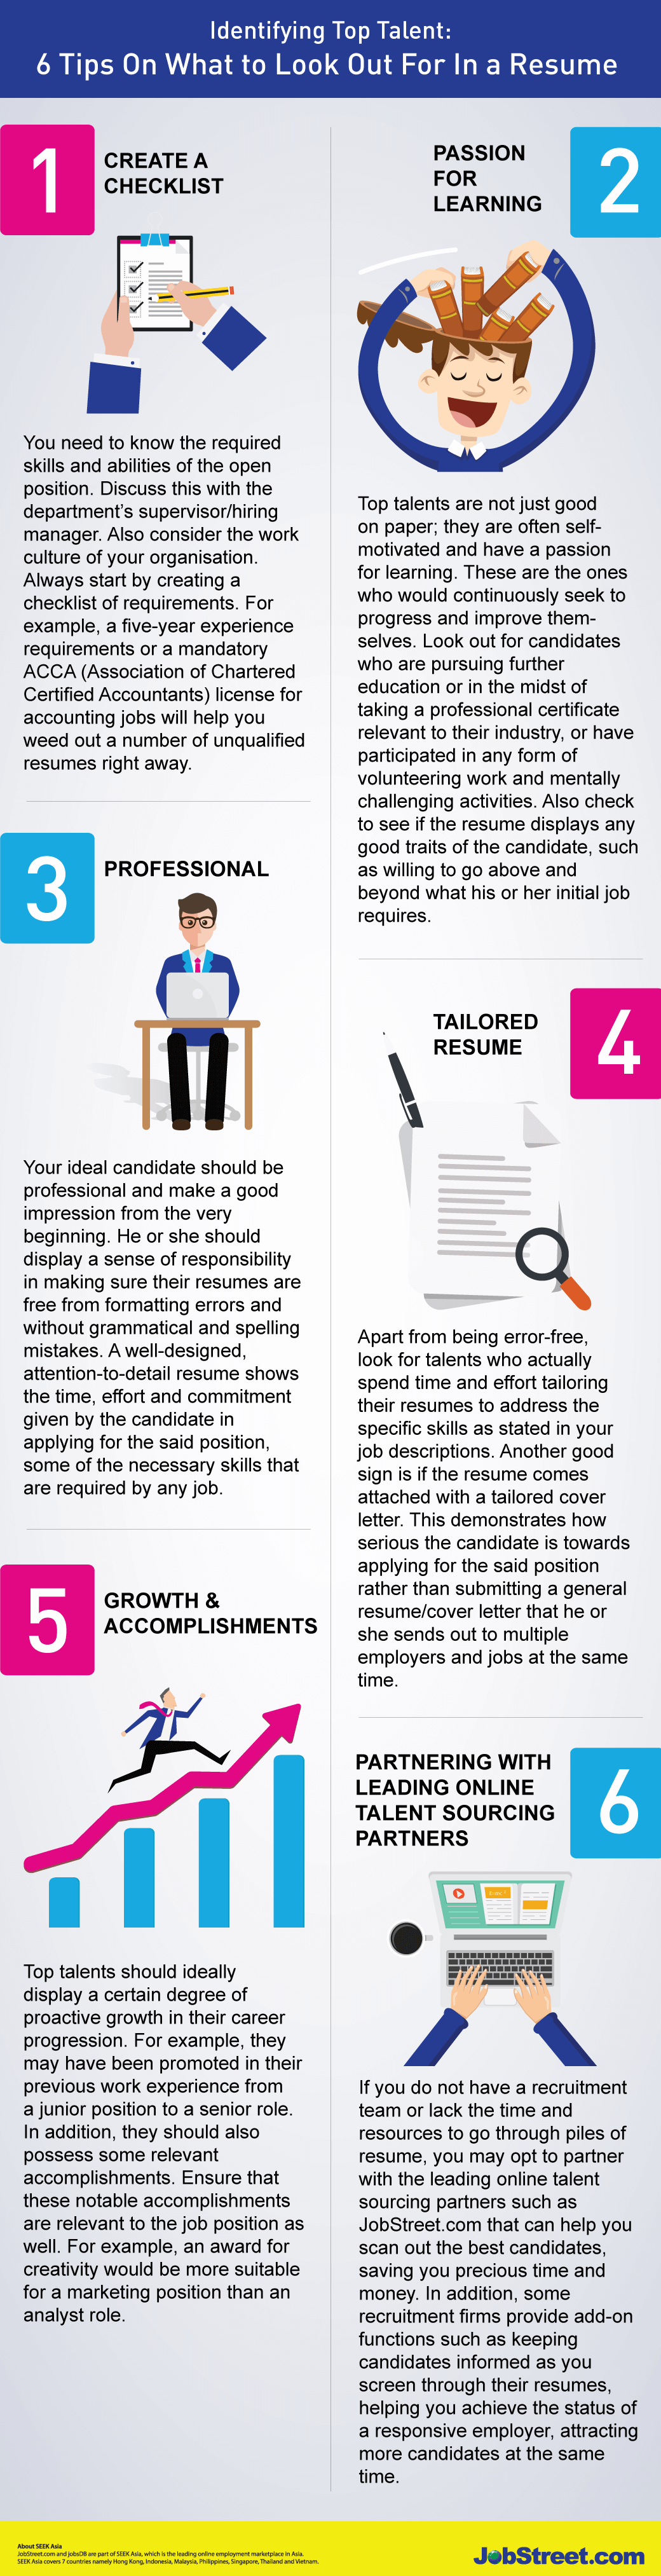 infographic-6-tips-on-what-to-look-out-for-in-a-resume